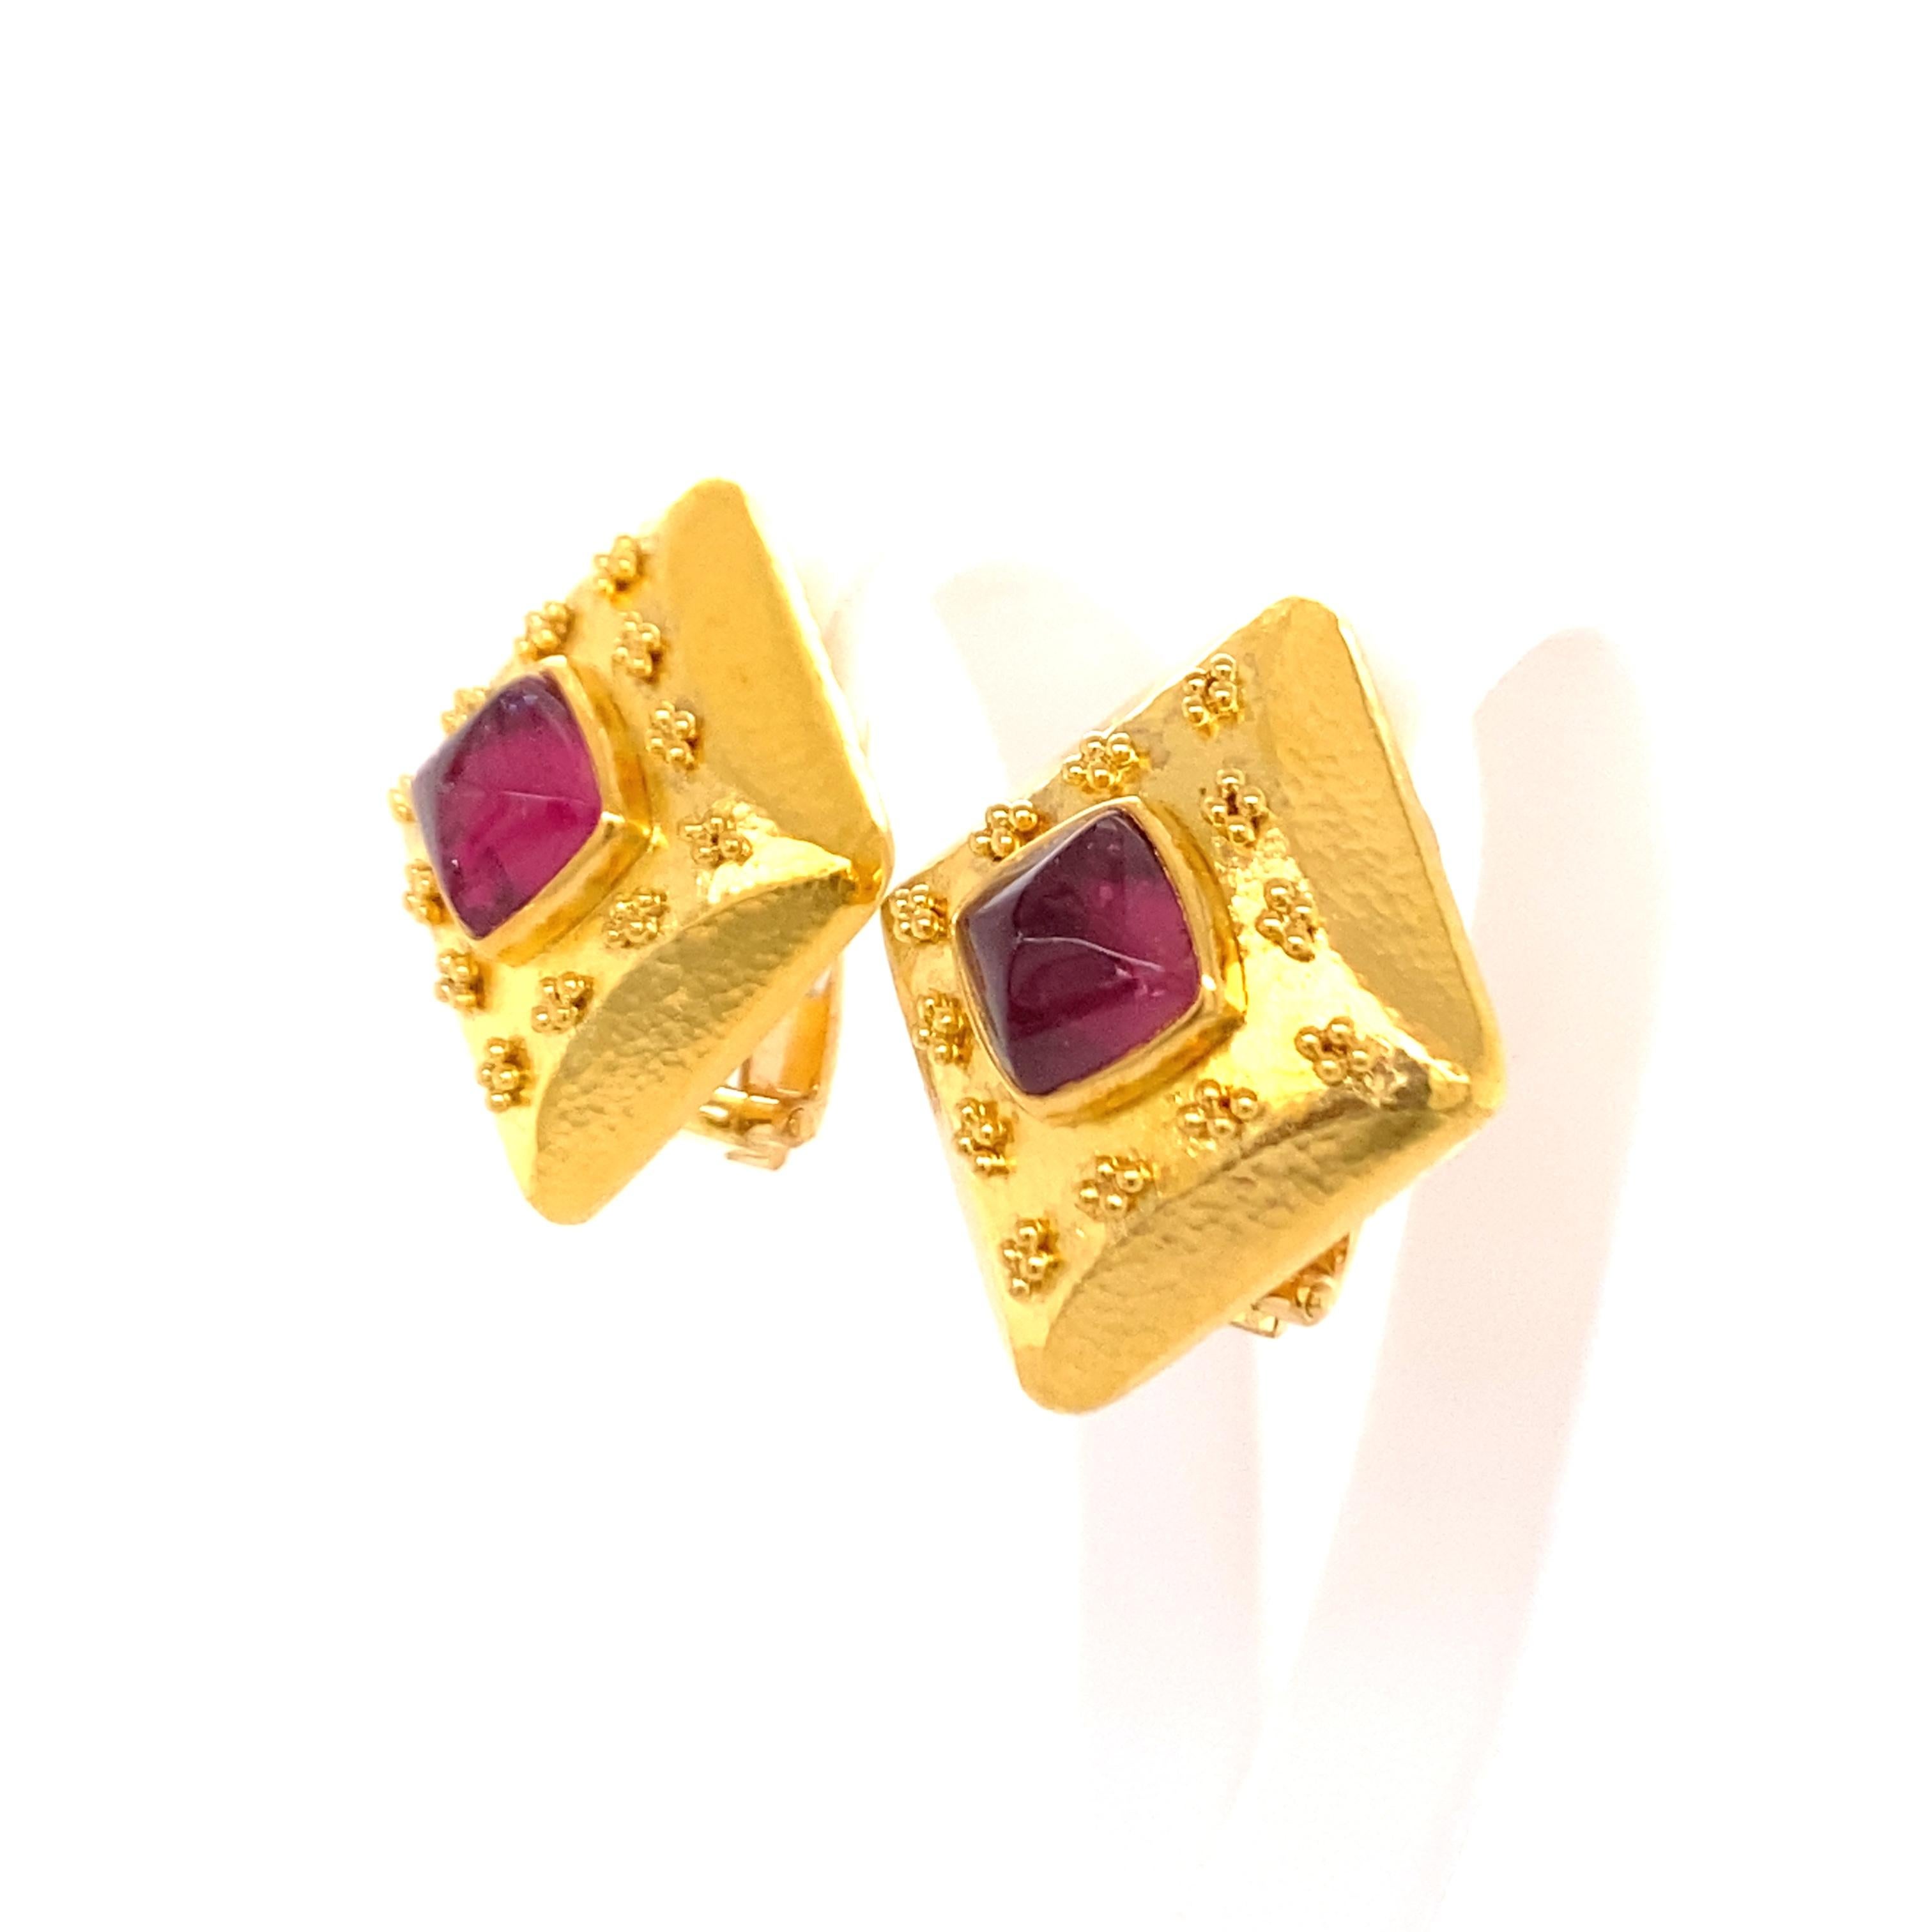 This beautiful pair of earclips features two sugarloaf cabochon cut pink tourmalines with a total weight of approximately 3.00 carats. The setting in rich 18 karat yellow gold is decorated with a fine granulation entourage, reminiscent of the high